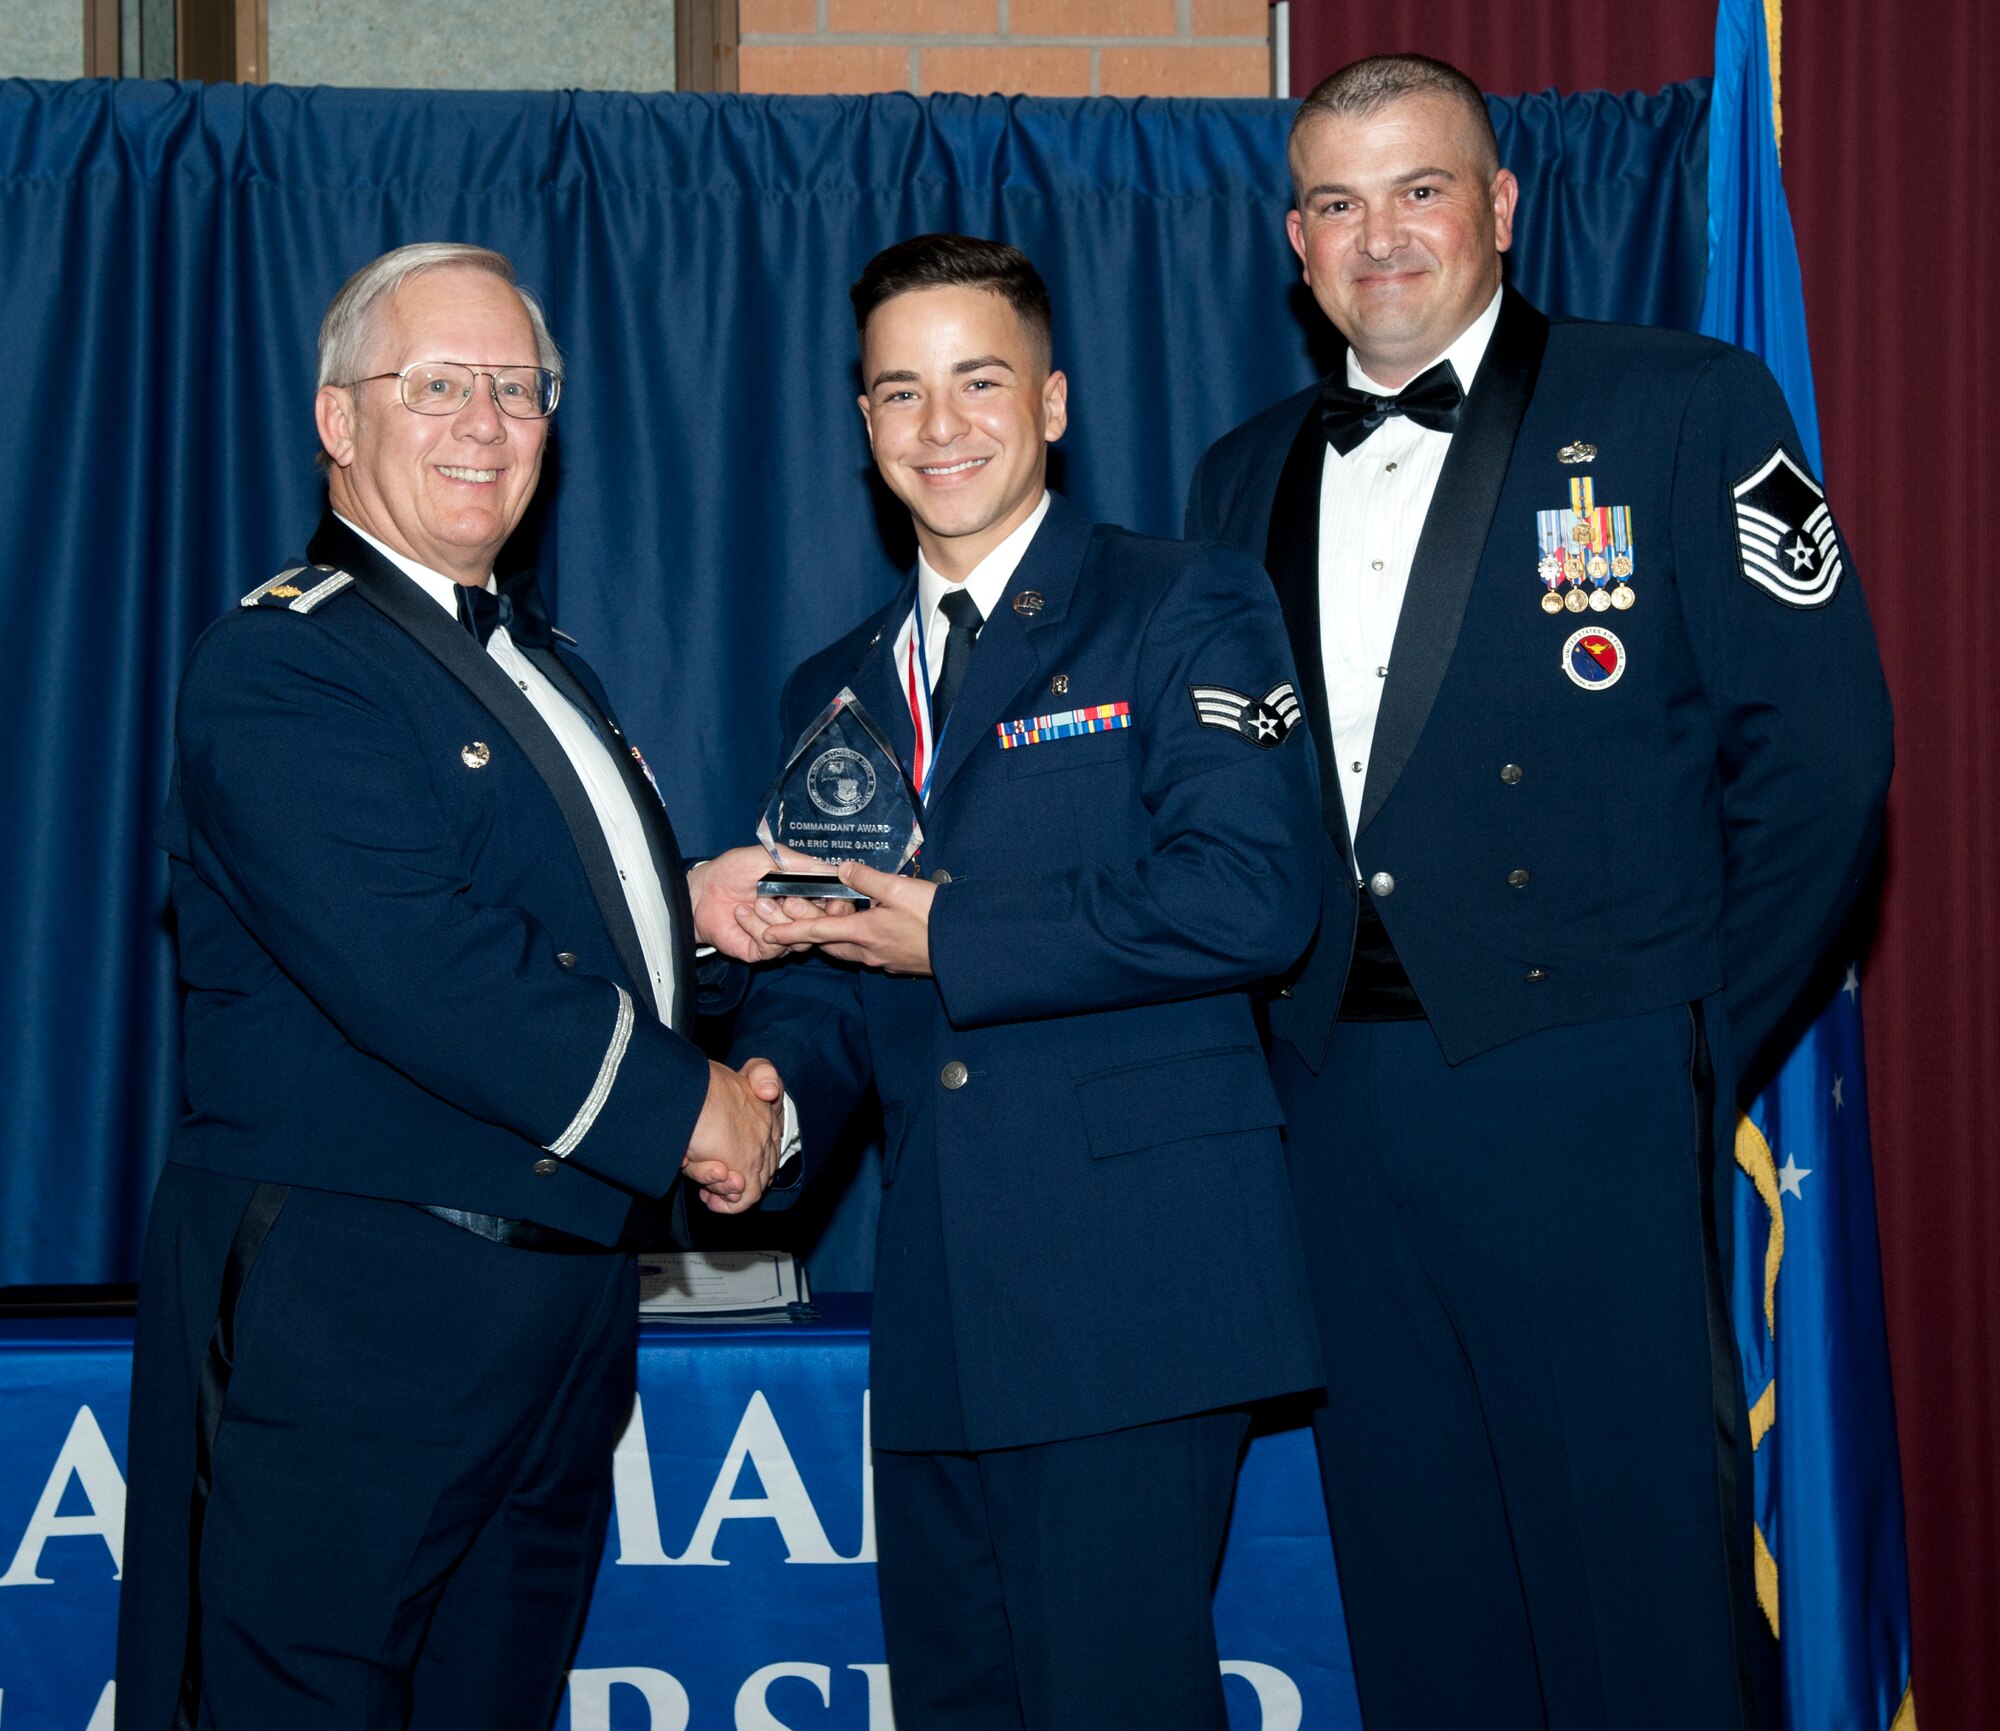 Eric Ruiz Garcia of the 71st Medical Support Squadron accepts the Commandant Award from retired Maj. George Pankonin and Master Sgt. James Goswick, the ALS commandant, March 25 during the first-ever Airman Leadership School graduation at Vance in the Vance Collocated Club. Pankonin was representing the Air Force Association who sponsored the award. (U.S. Air Force photo\ 2nd Lt. Isabel Crump)